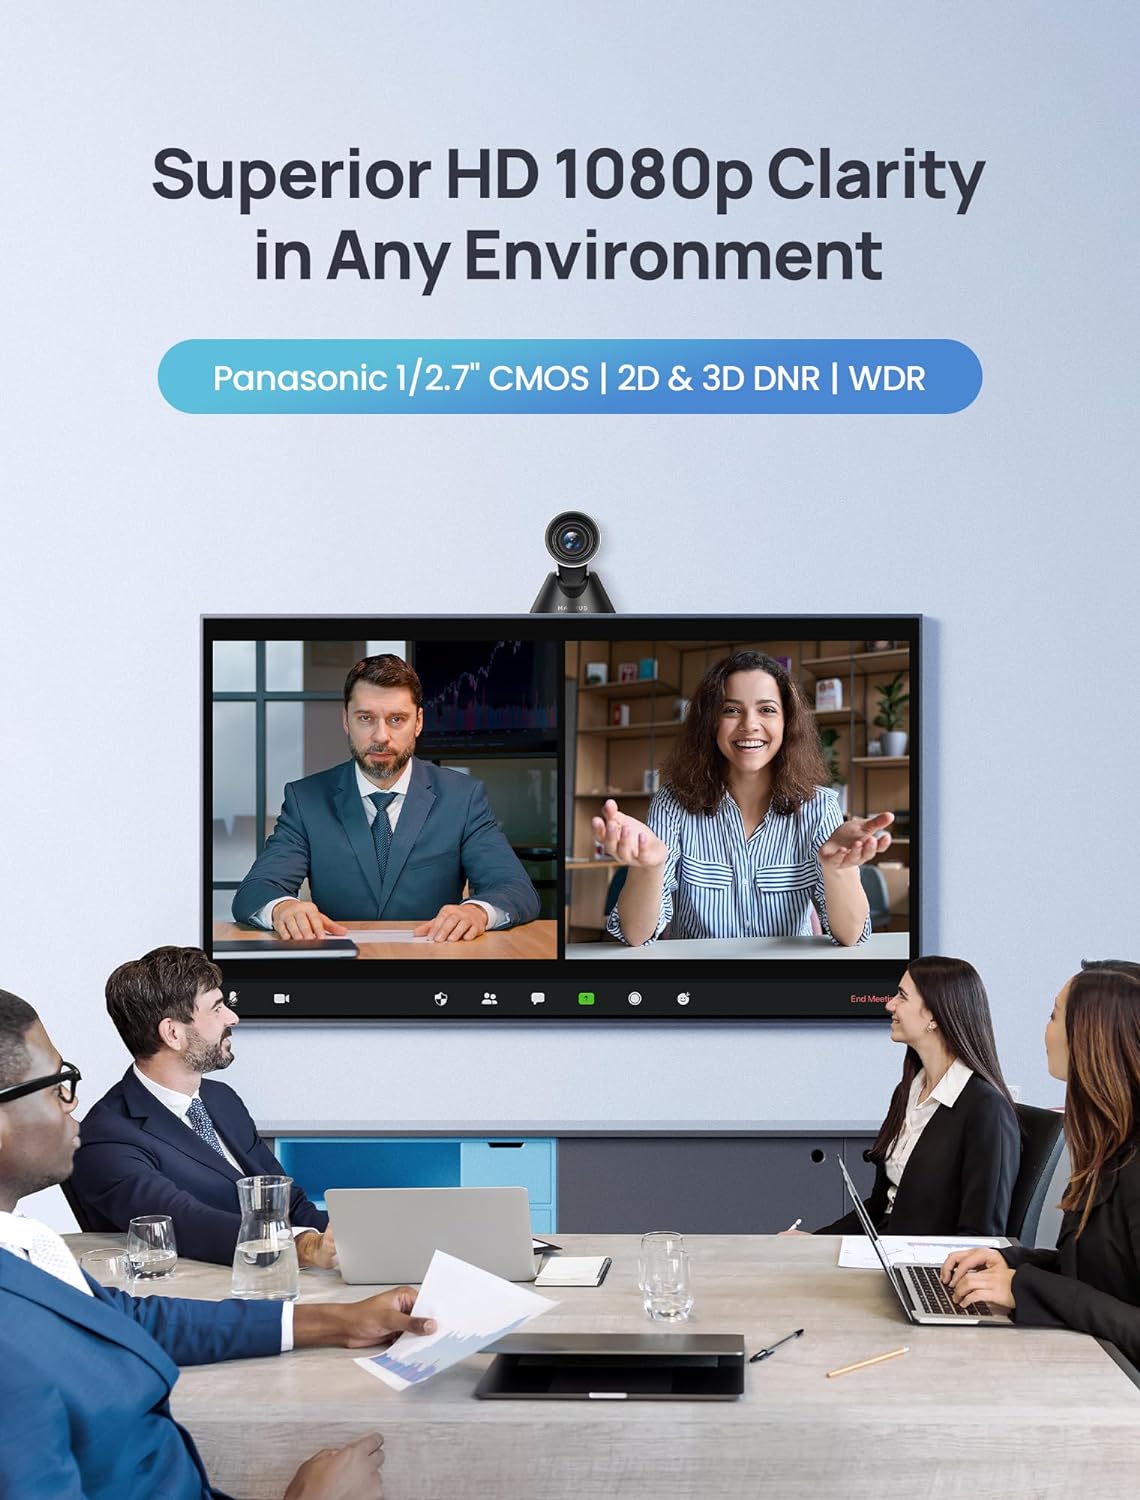 Enther&MAXHUB PTZ Camera,HD 1080p Video Conference Camera System with 12X Optical Zoom,Wide-Angle USB Conference Room Webcam with Remote Control for Streaming, Video Calling,